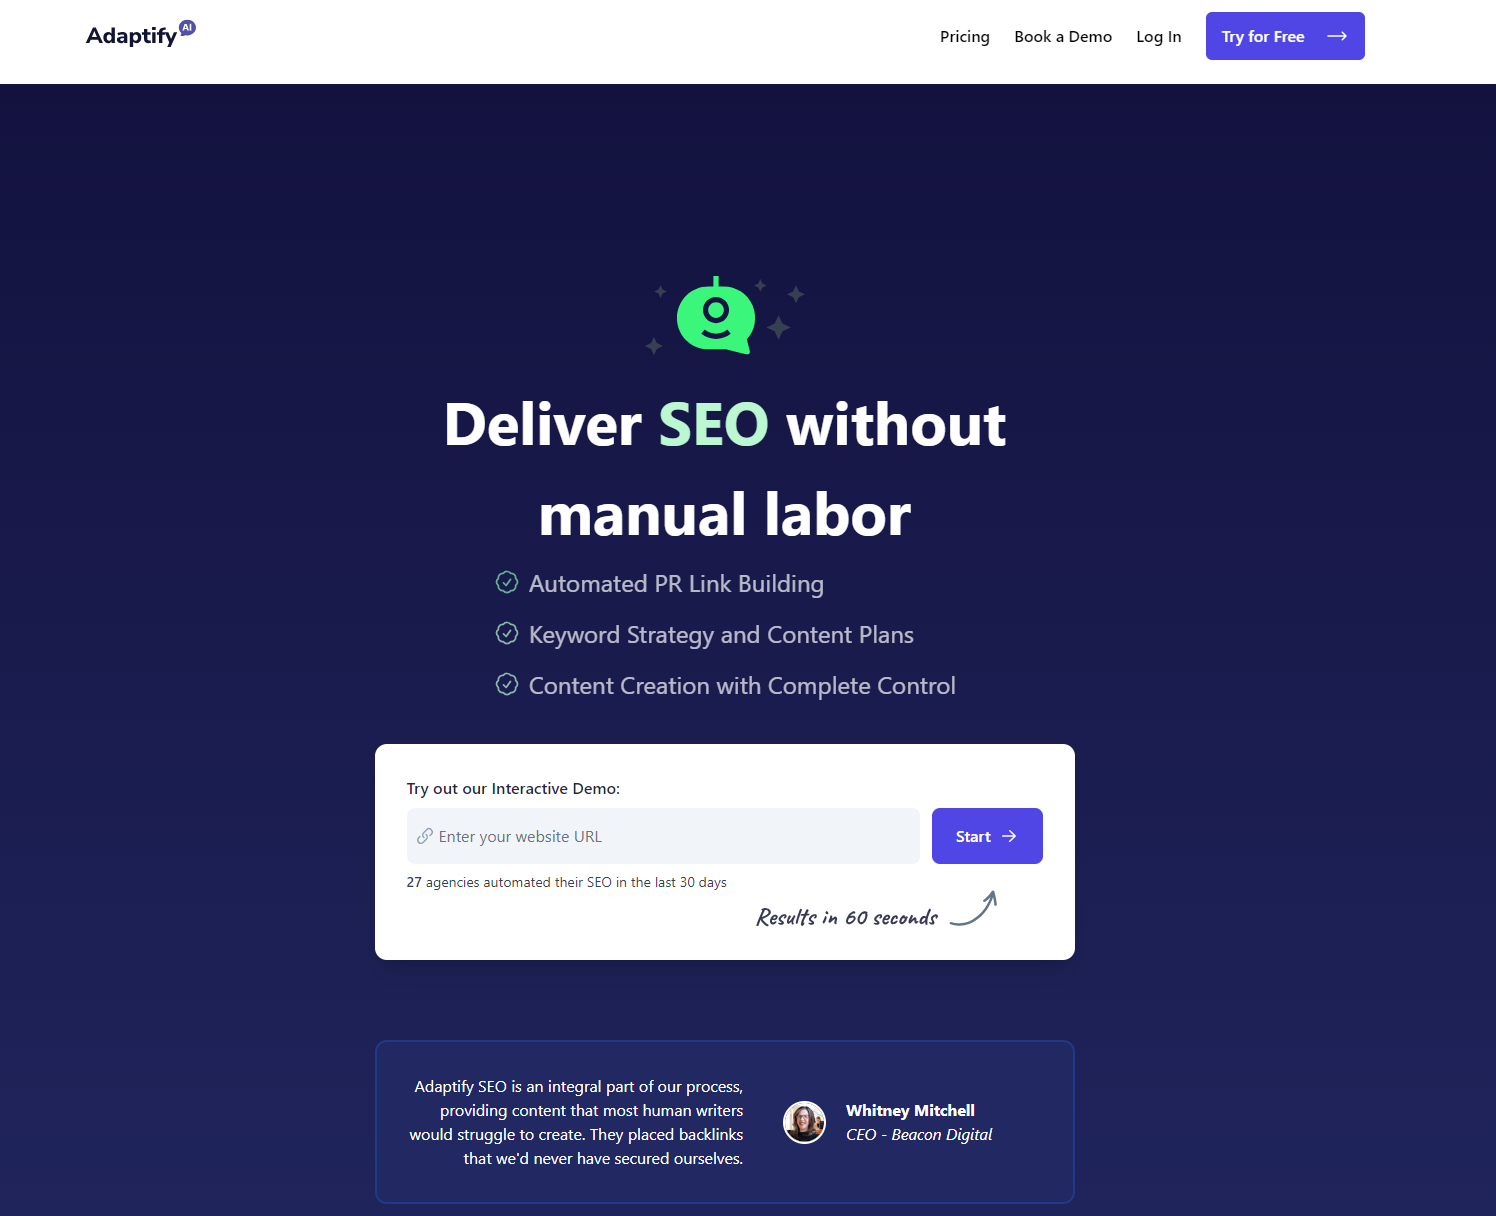 Adaptify Deliver SEO without manual labor